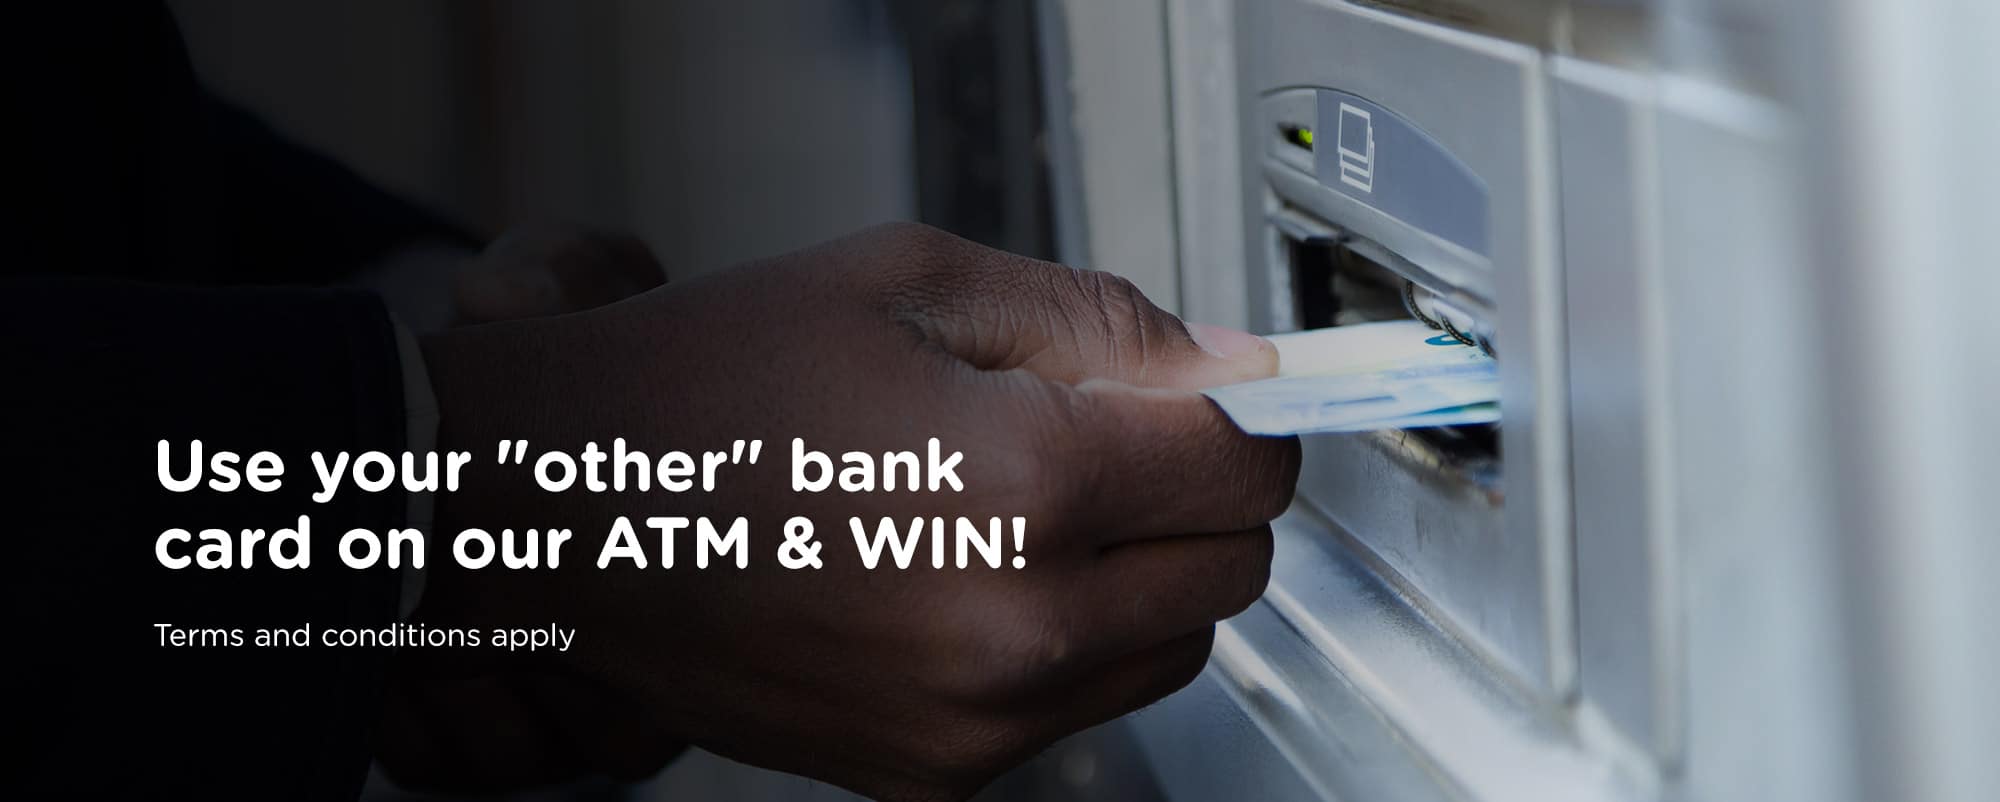 Use our ATM and WIn